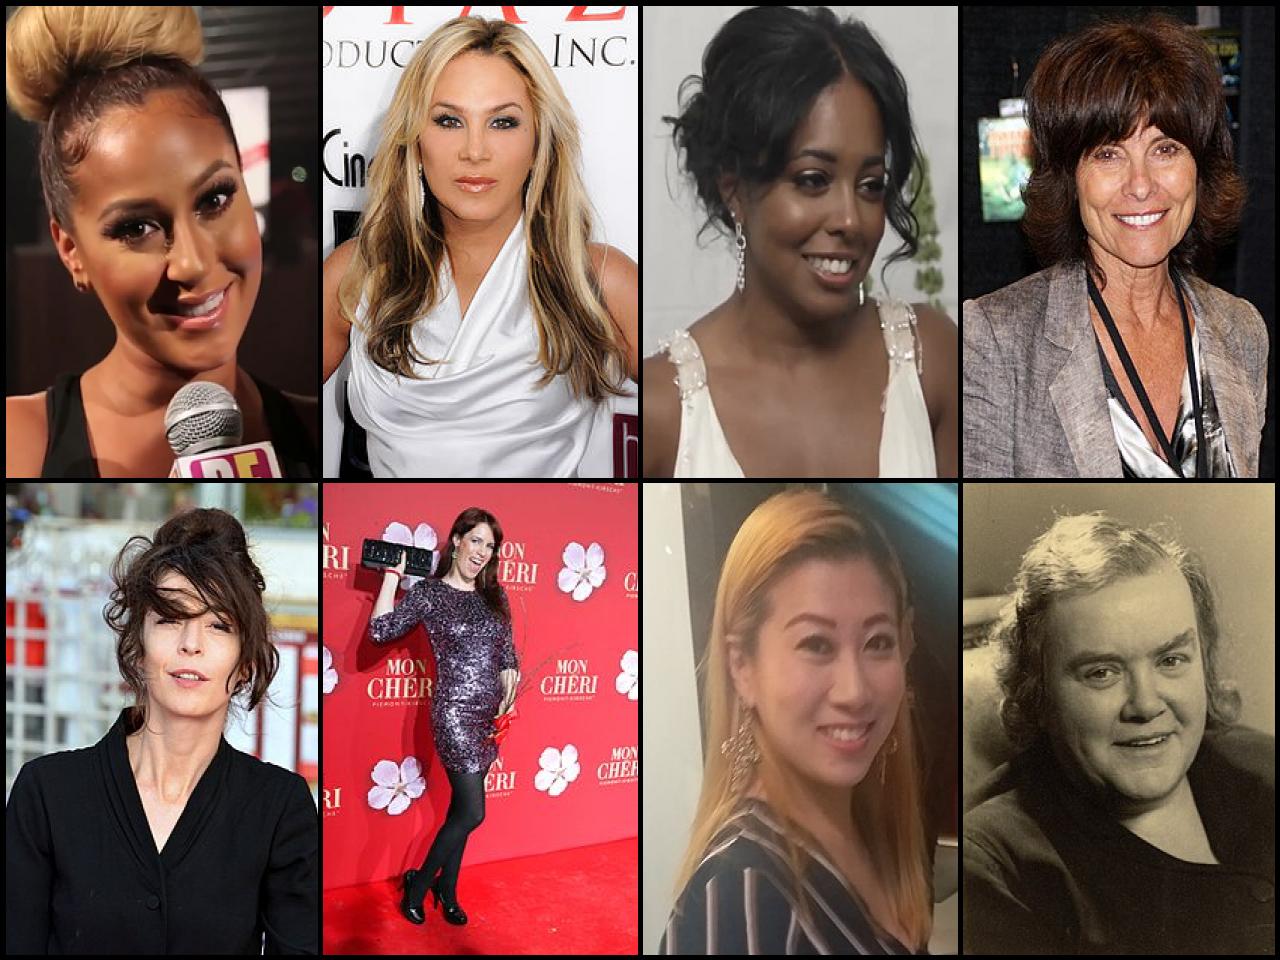 List of Famous people named <b>Adrienne</b>